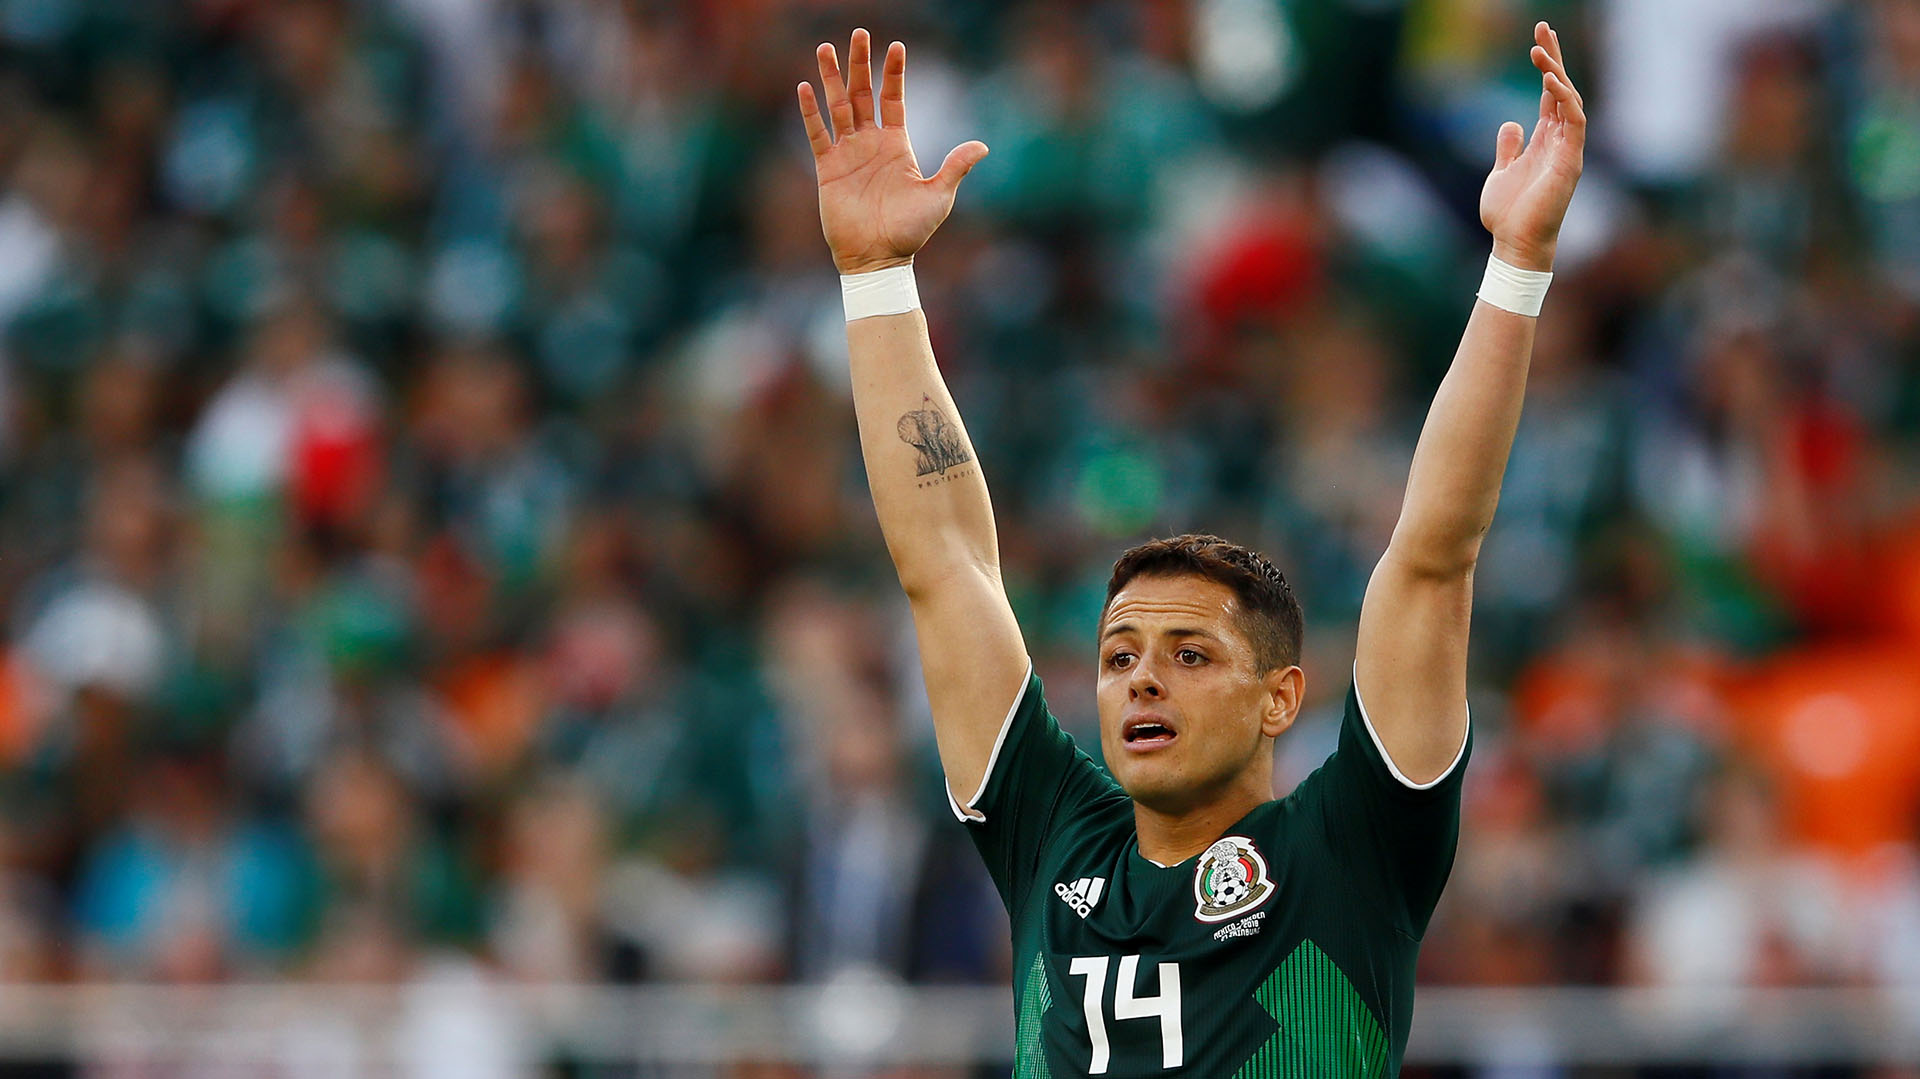 Javier Hernández with Mexico at the 2018 World Cup in Russia. Photo: REUTERS/Jason Cairnduff